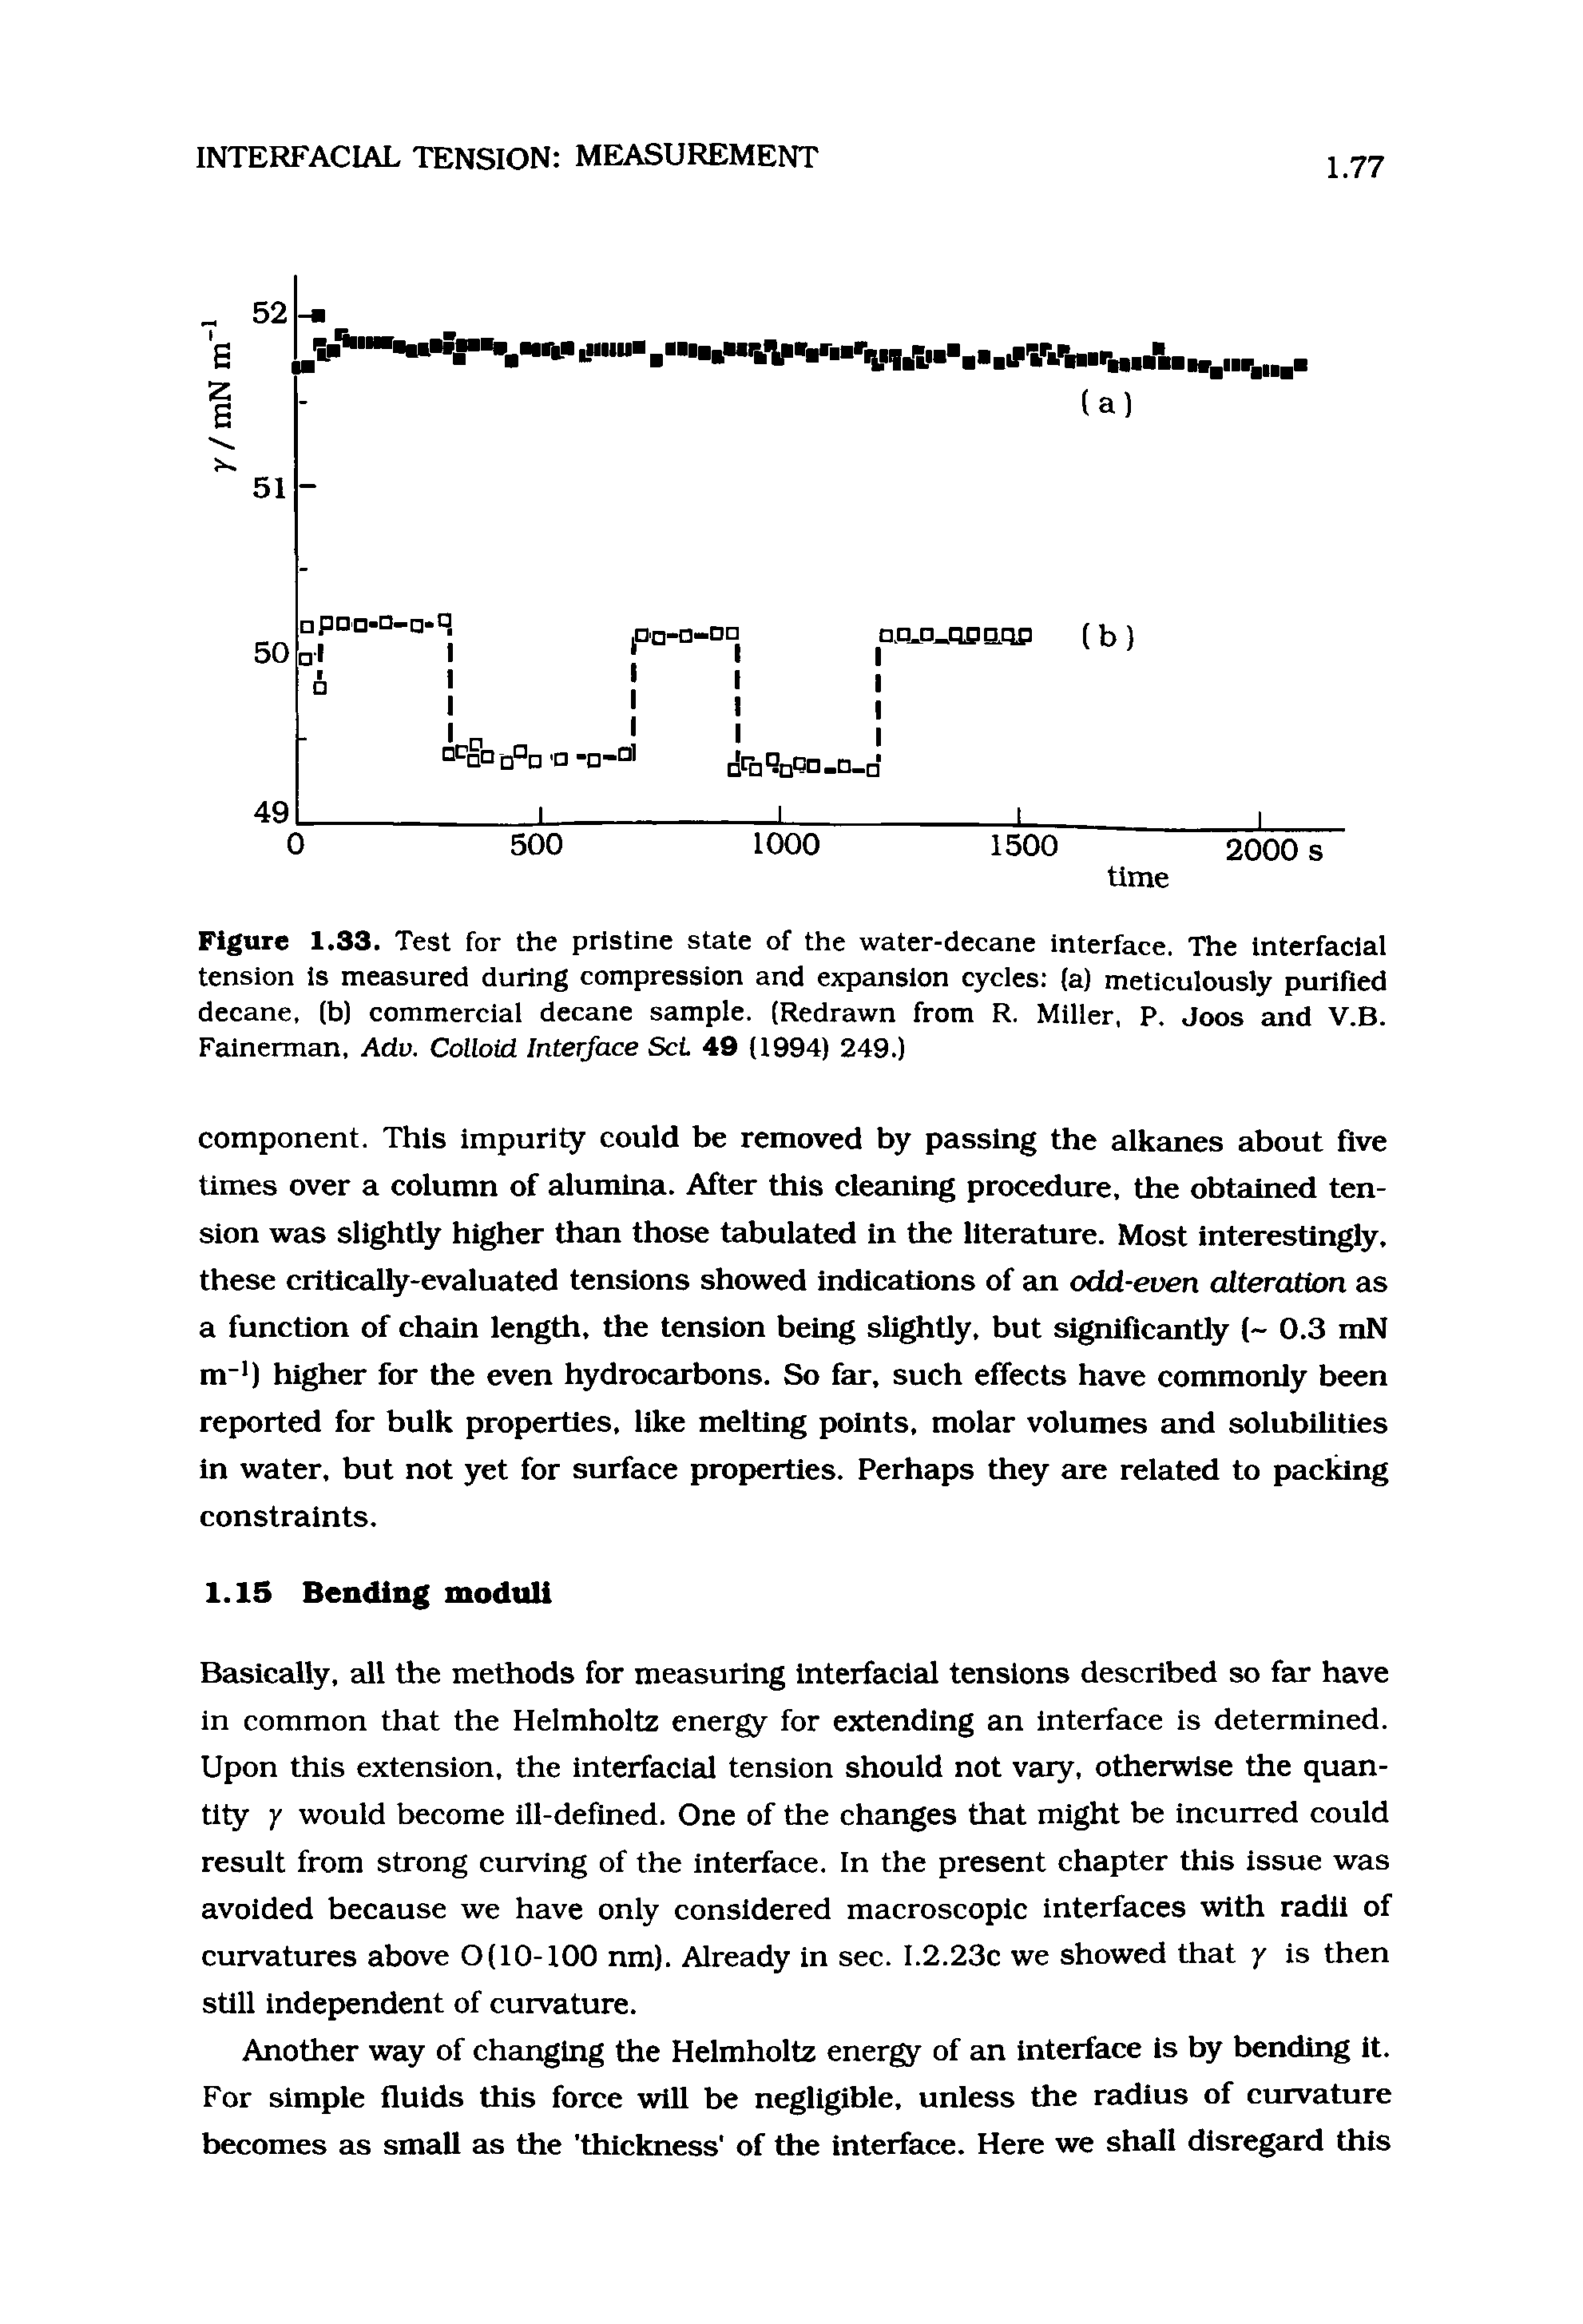 Figure 1.33. Test for the pristine state of the water-decane interface. The Interfaclal tension is measured during compression and expansion cycles (a) meticulously purified decane, (b) commercial decane sample. (Redrawn from R. Miller, P. Joos and V.B. Falnerman, Adv. Colloid Interface Set 49 (1994) 249.)...